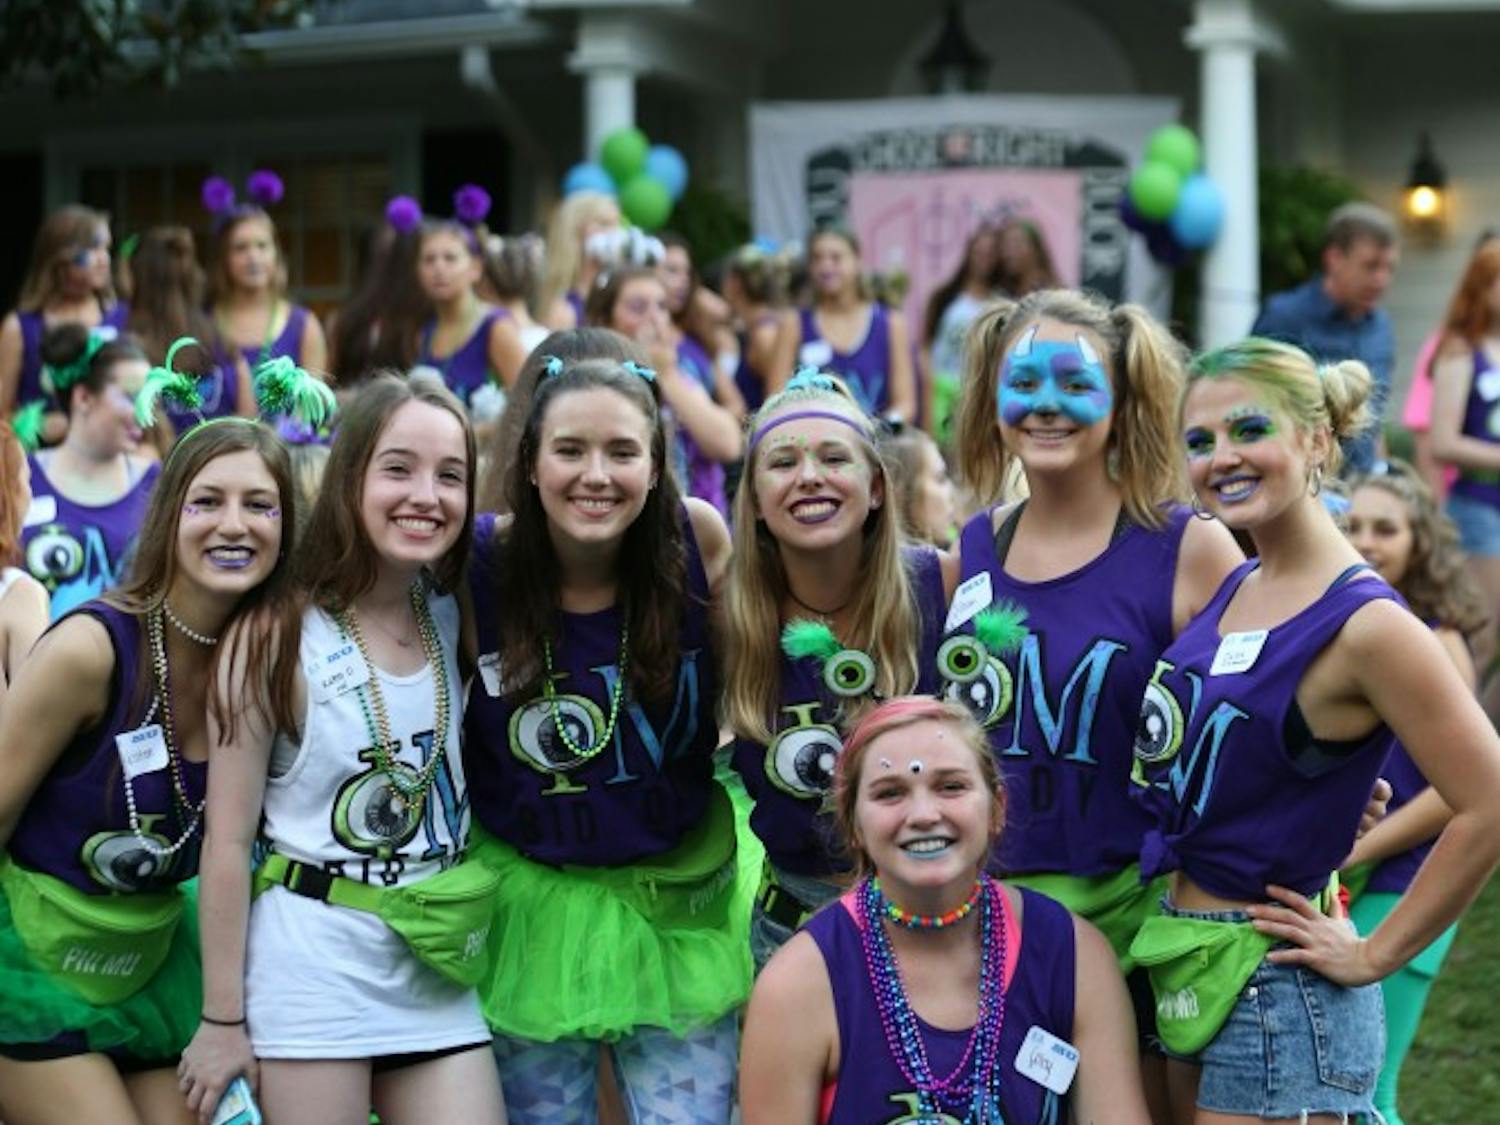 Members of Phi Mu stand in front of their sorority house.